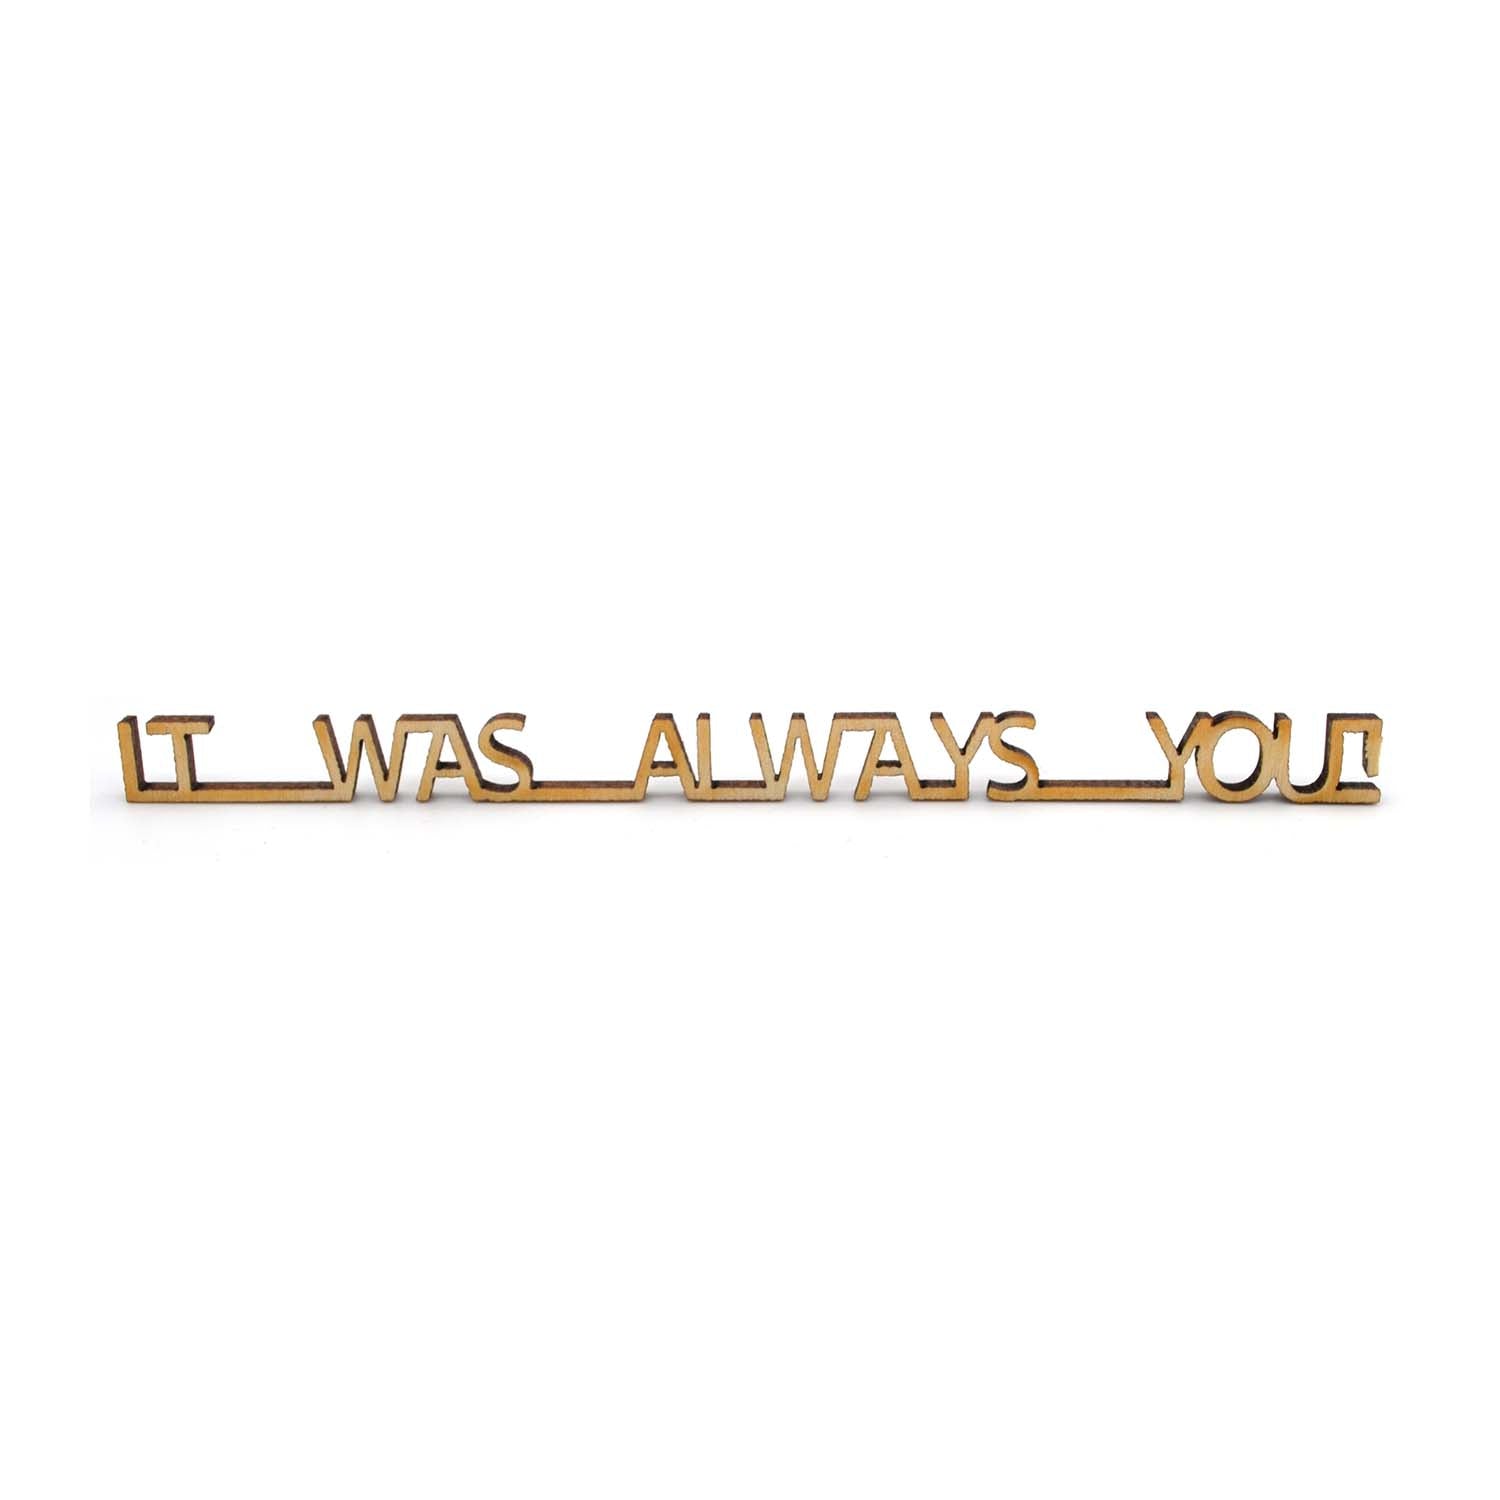 It was always you!